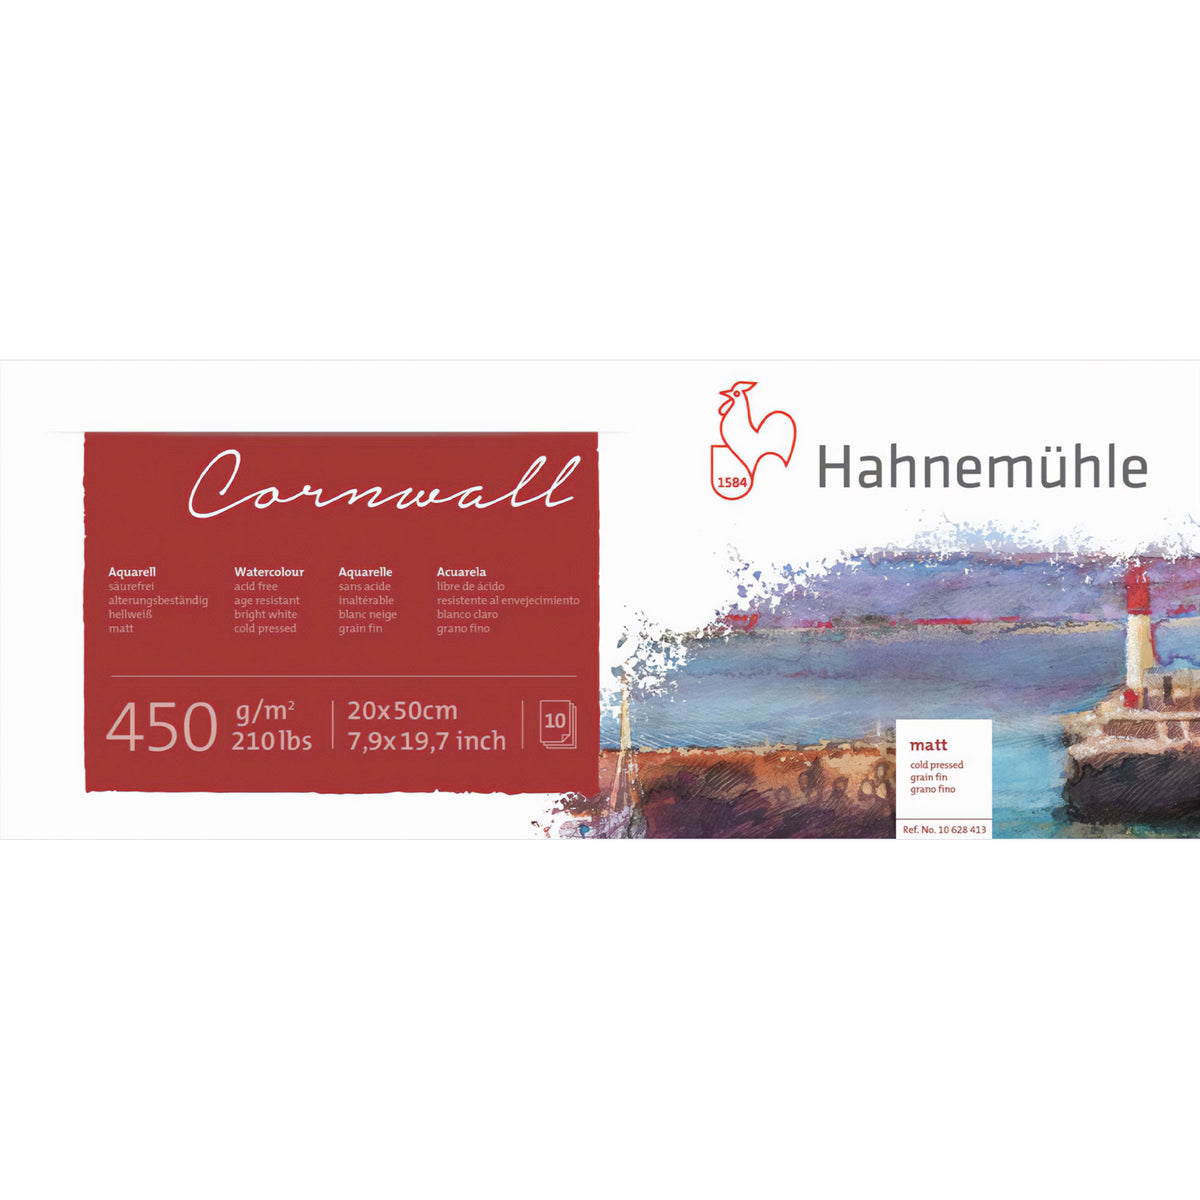 Hahnemühle Cornwall Panorama Block 20x50 - Cover, showcasing a painting of Newlyn Harbour